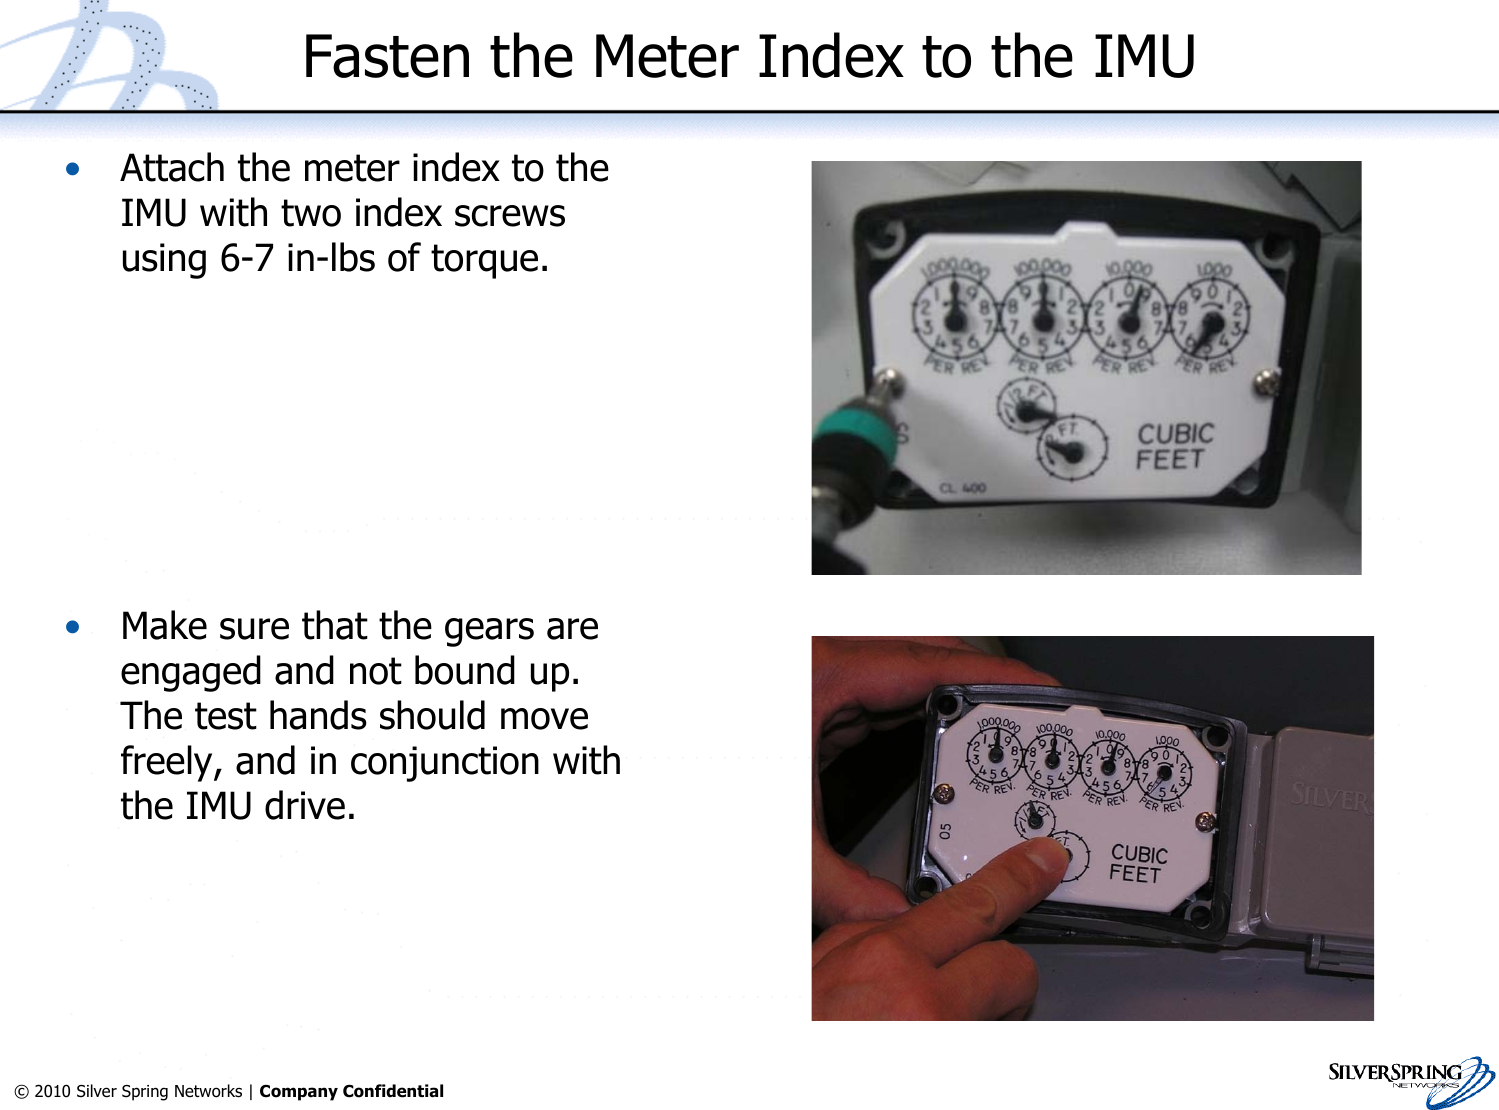 33© 2010 Silver Spring Networks | Company Confidential Fasten the Meter Index to the IMU•Attach the meter index to theIMU with two index screwsusing 6-7 in-lbs of torque.•Make sure that the gears areengaged and not bound up.The test hands should movefreely, and in conjunction withthe IMU drive.